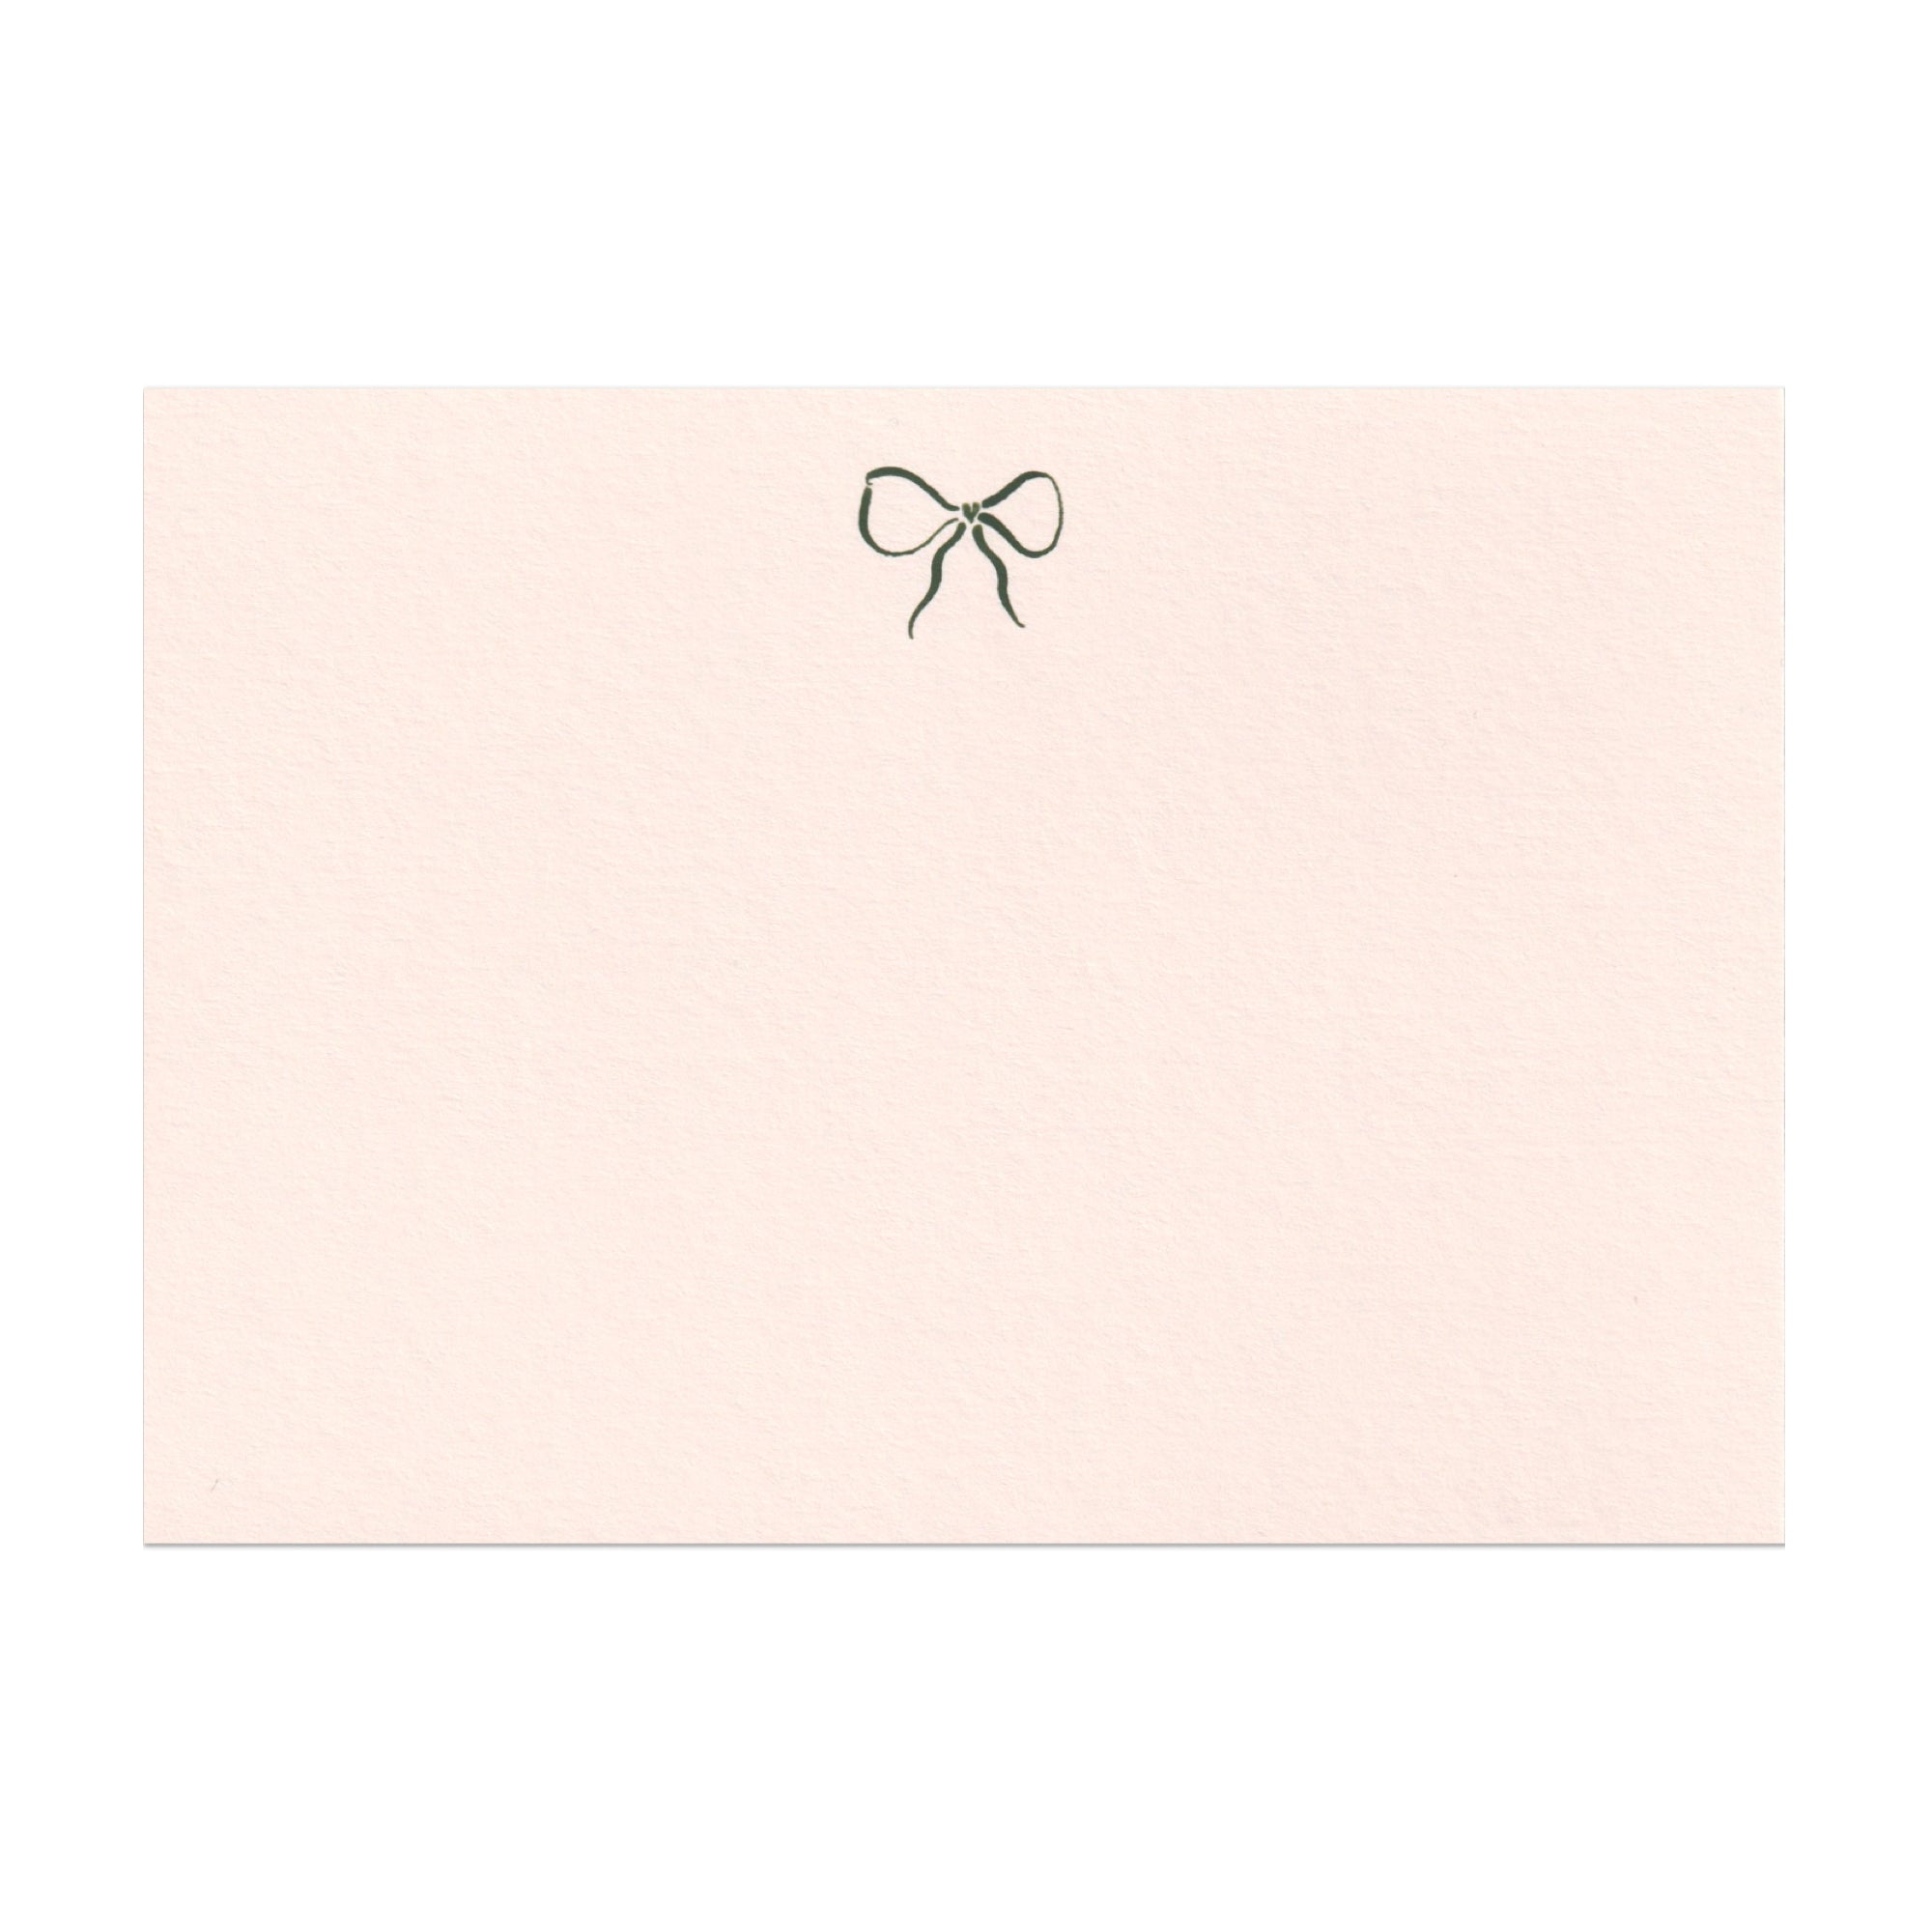 Bow note cards in Ballet pink by Memo Press